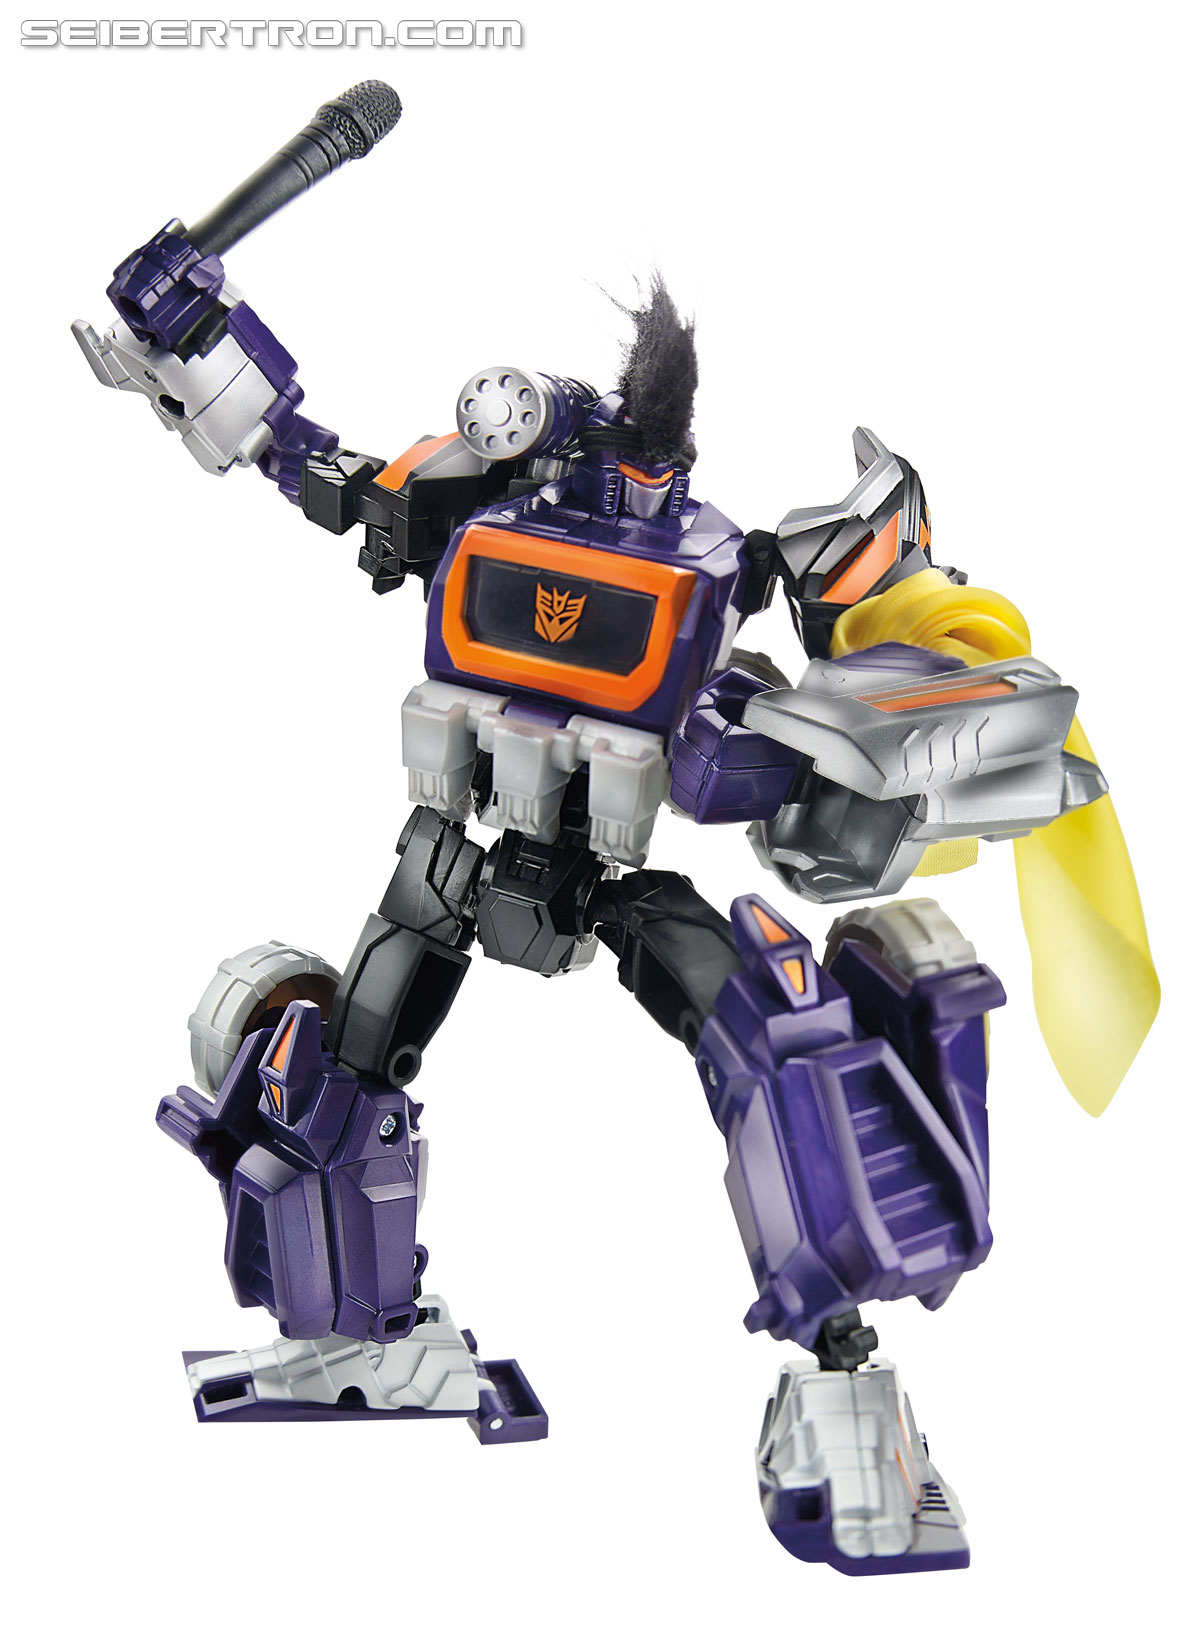 Transformers News: Re: SDCC 2014 Hasbro Panel Details